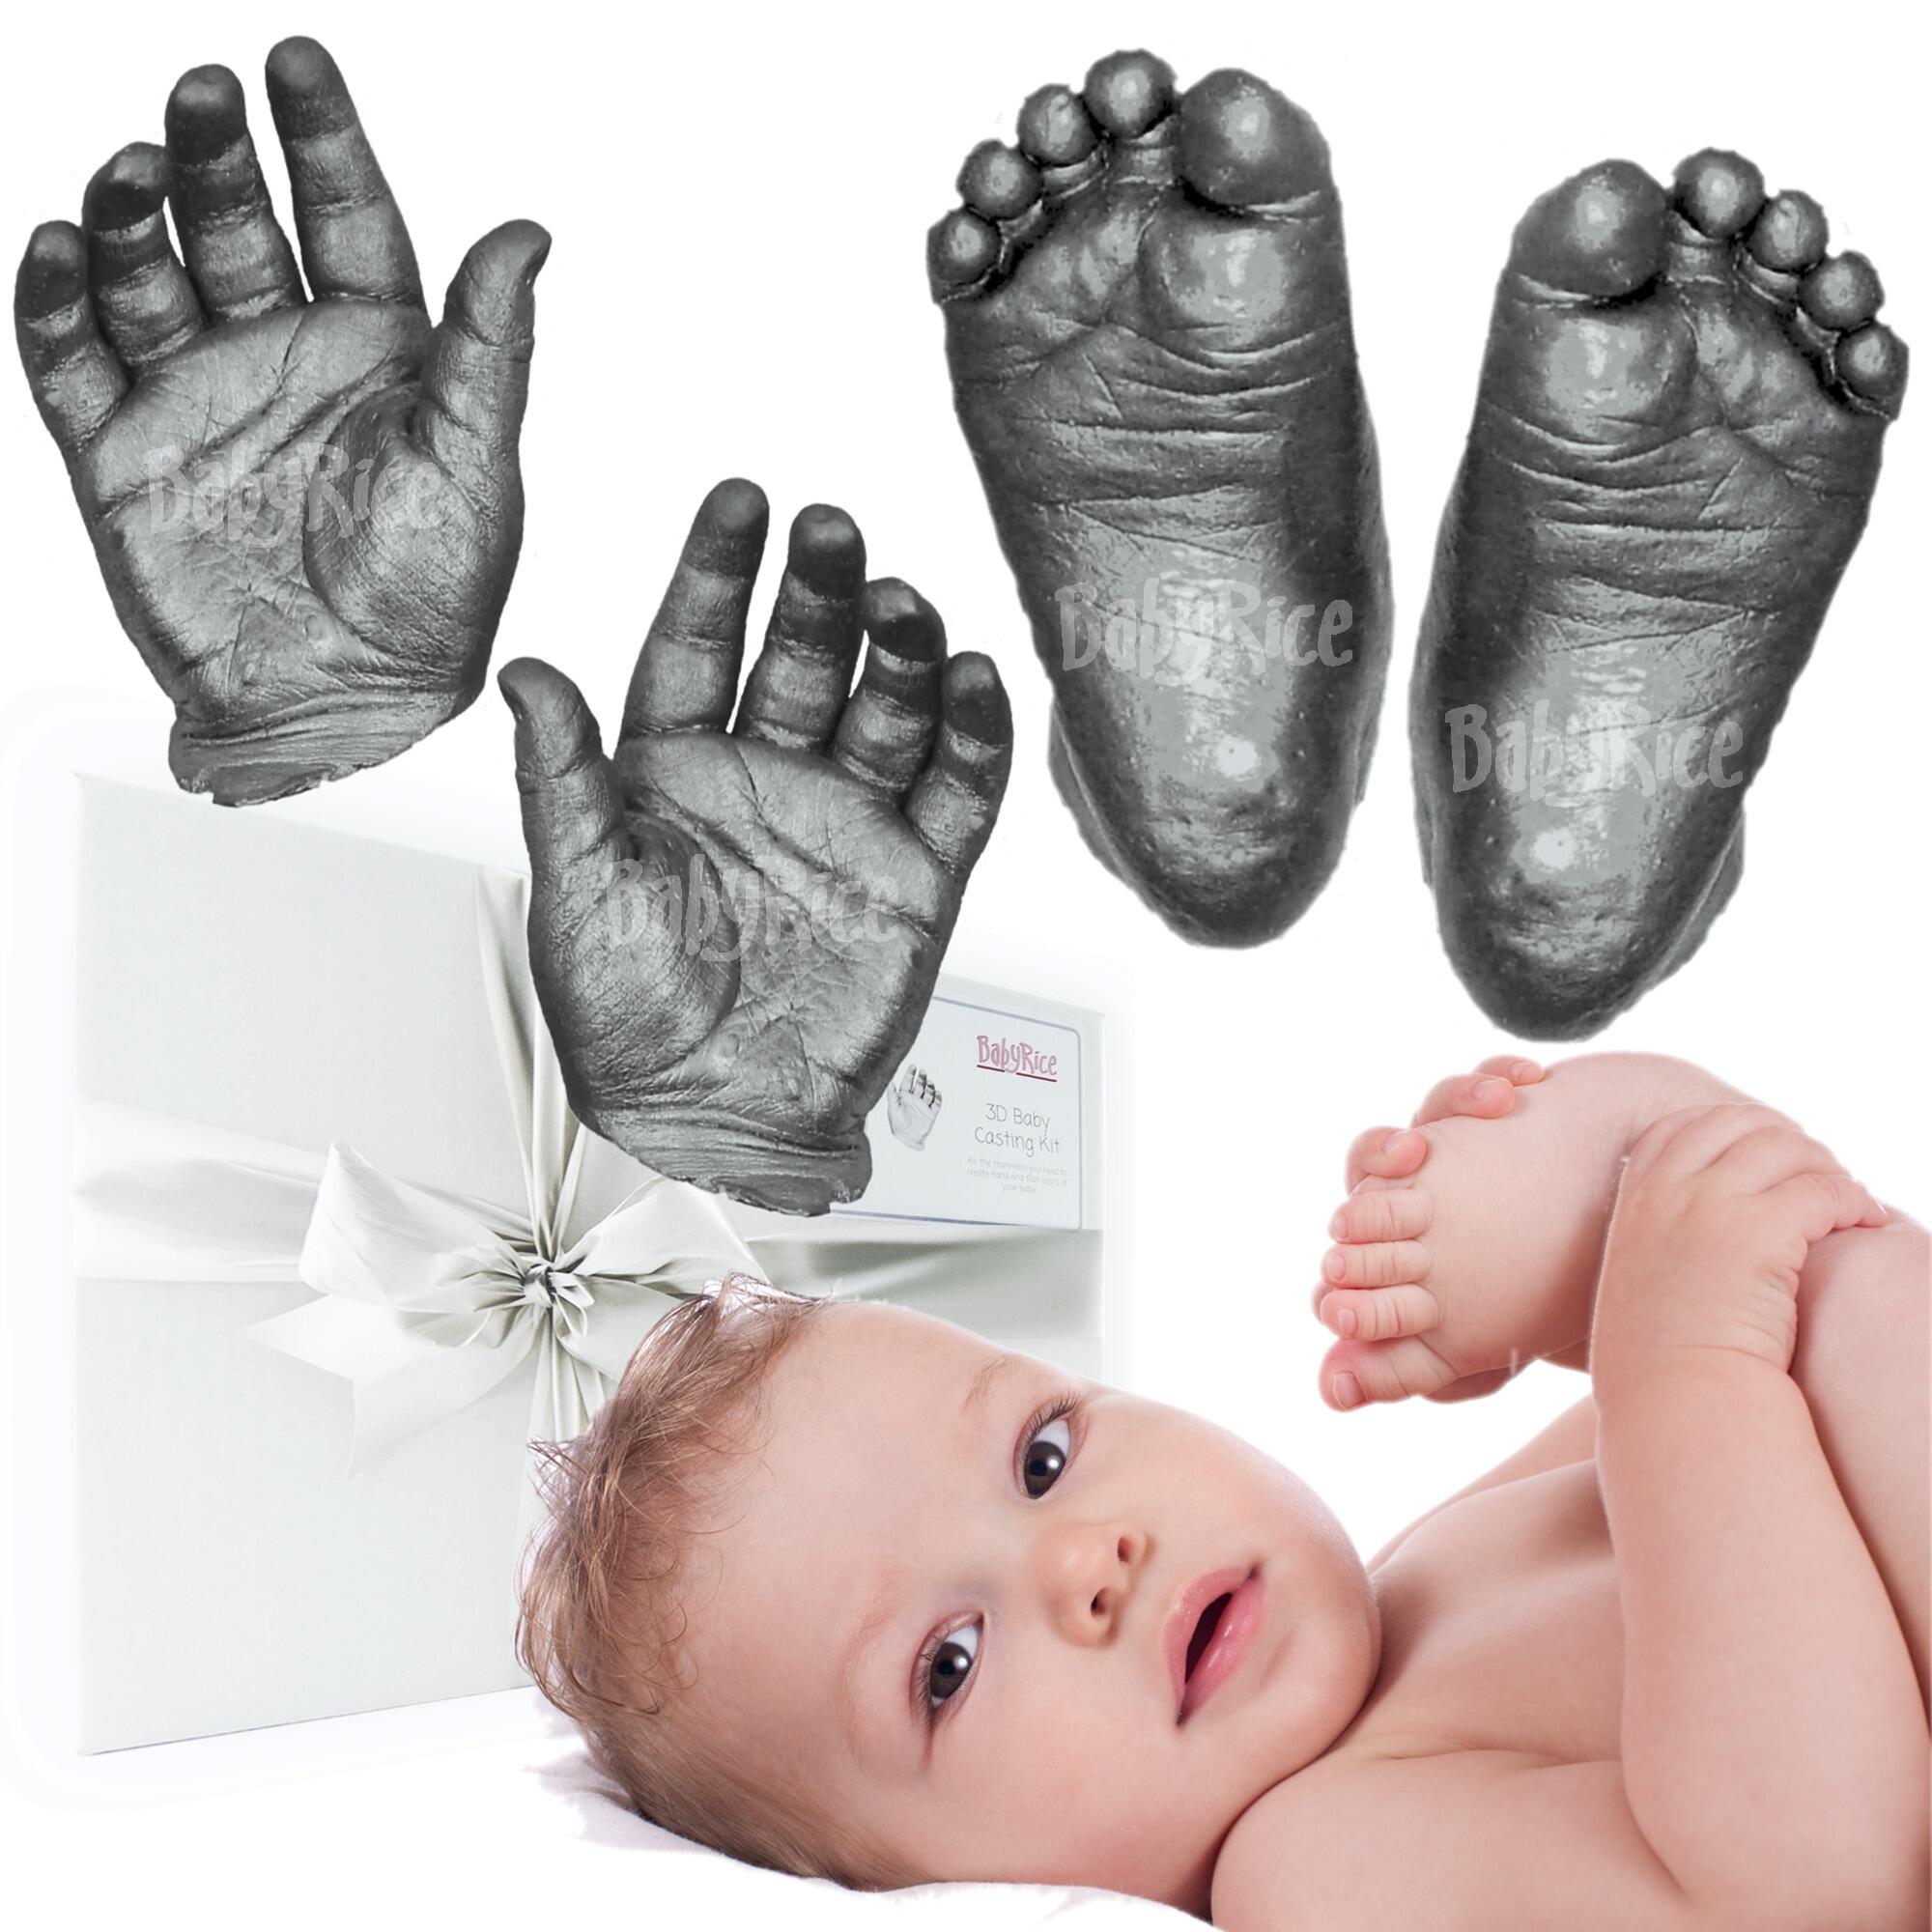 metallic pewter baby hands and feet casting kit